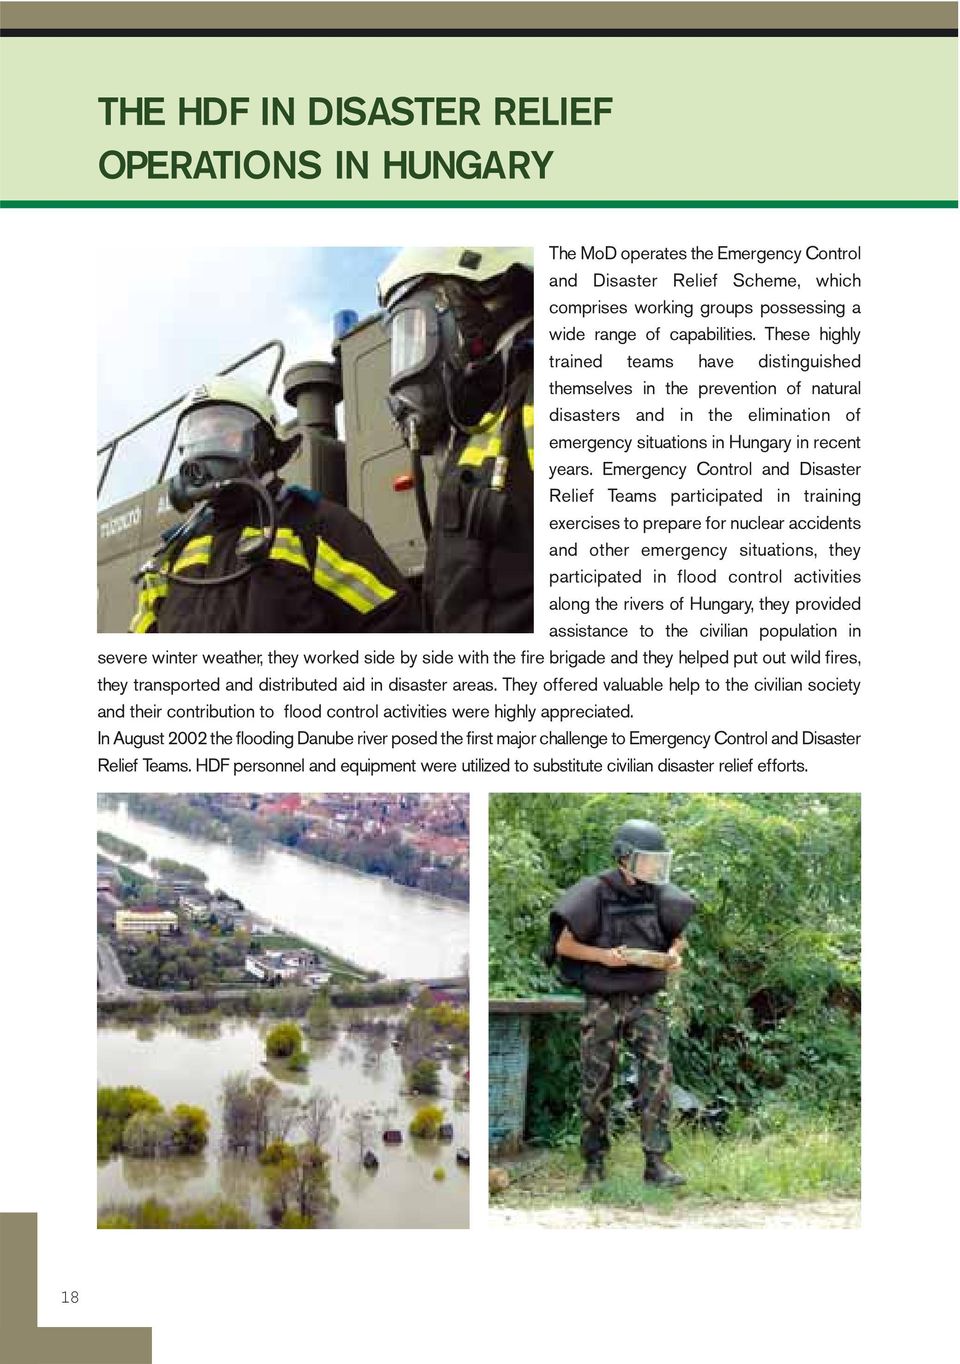 Emergency Control and Disaster Relief Teams participated in training exercises to prepare for nuclear accidents and other emergency situations, they participated in flood control activities along the